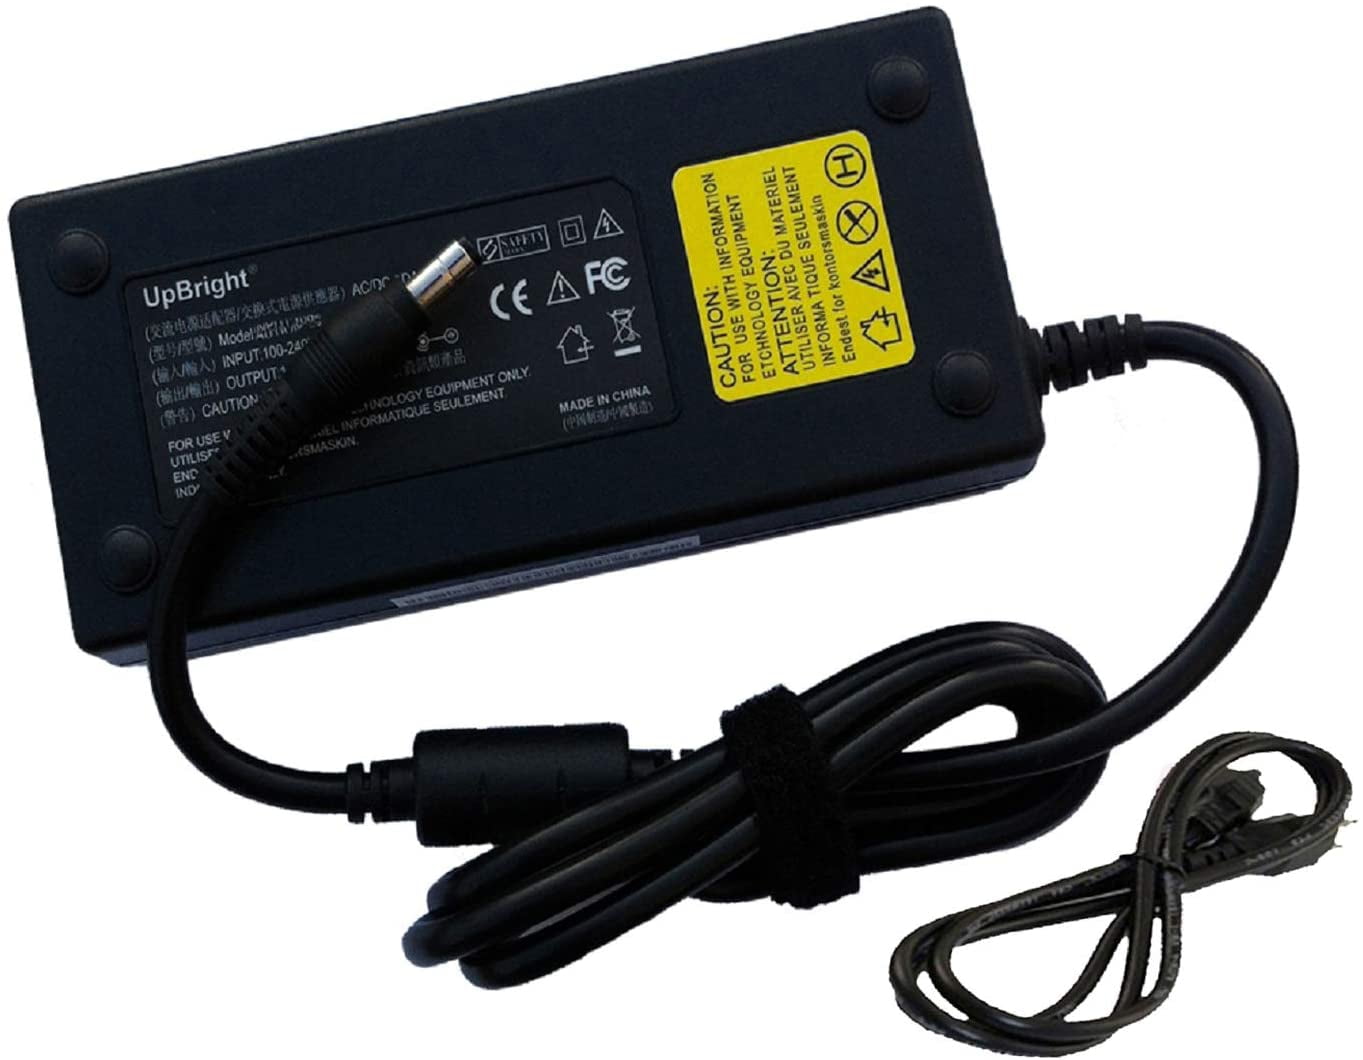 NEW 120W AC Adapter For Sager ACA-8760 ACA8760 Power Supply Cord Battery Charger 